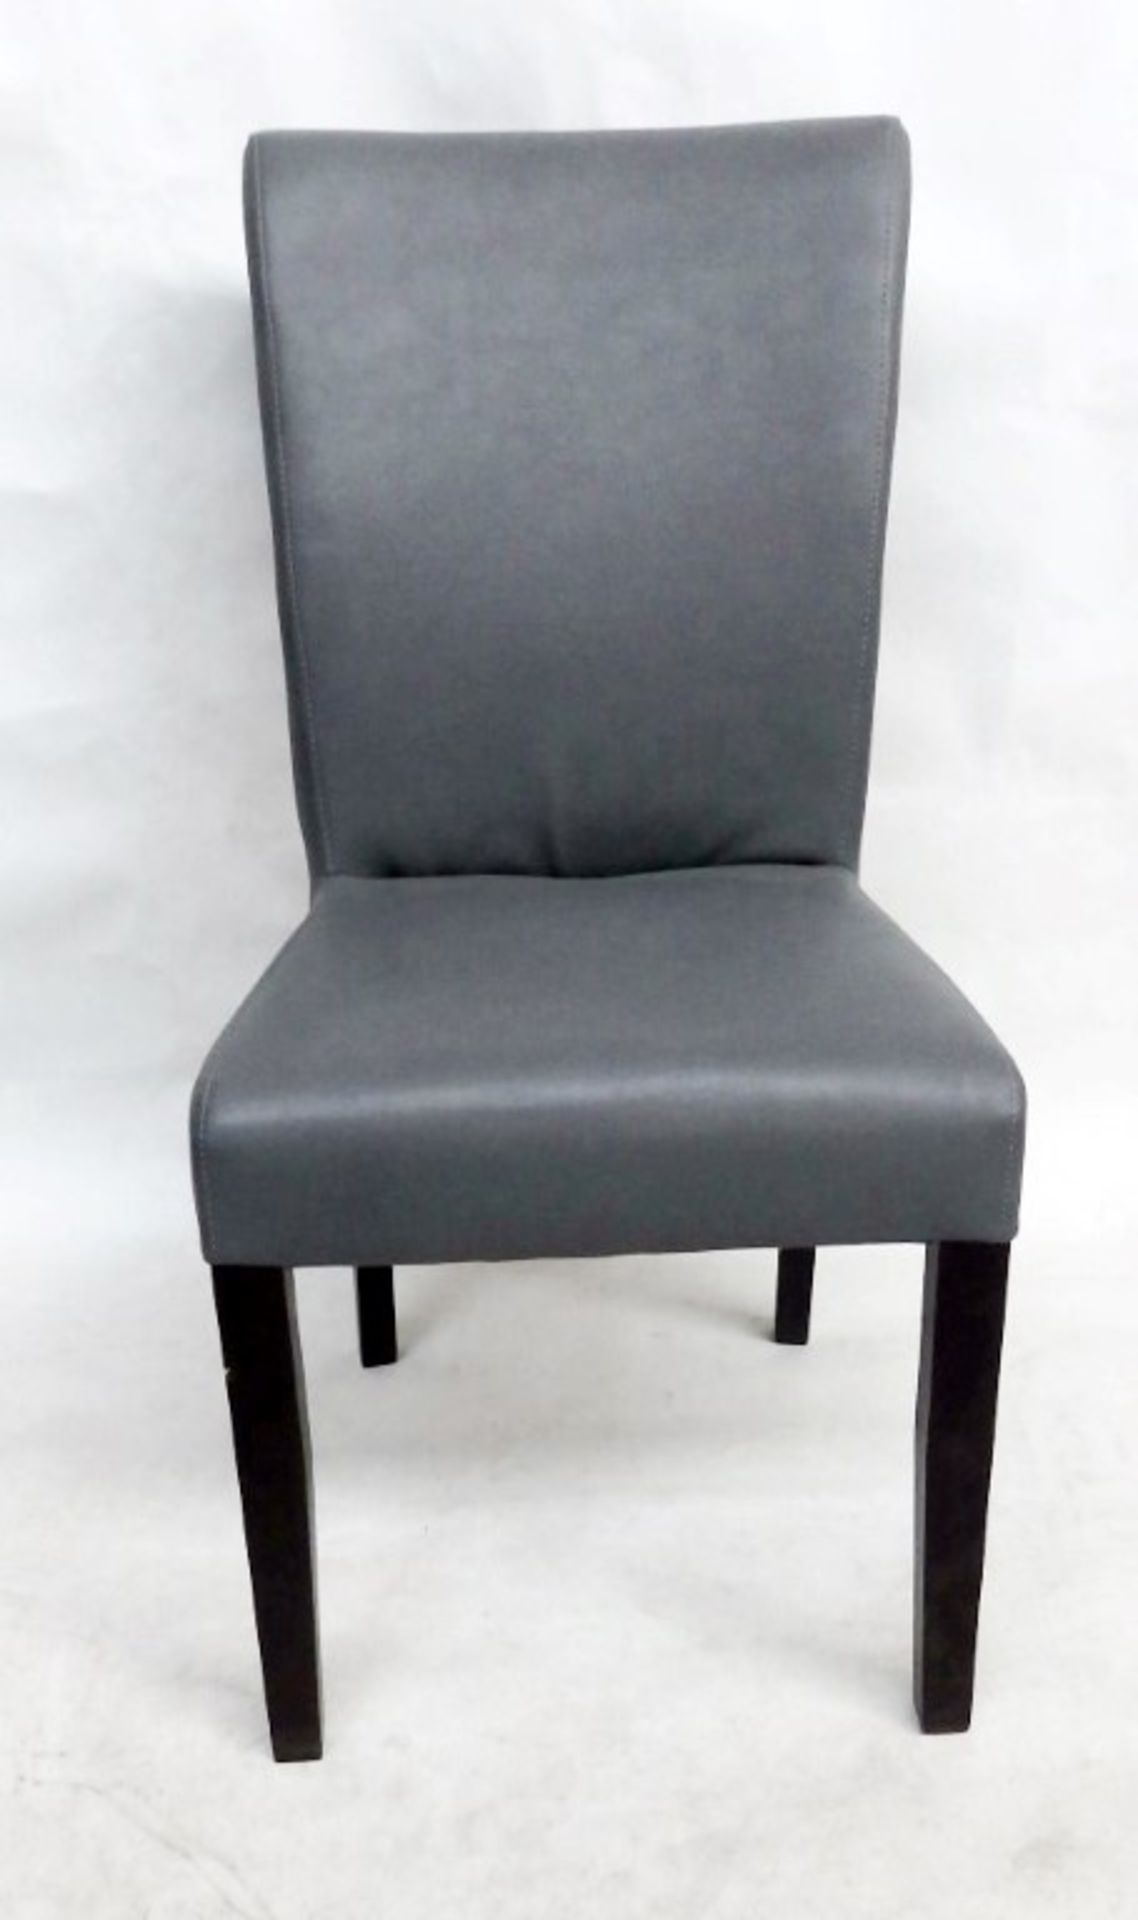 1 x Soft Grey Leather Chair - Handcrafted & Upholstered By British Craftsmen - Dimensions: W44 x D47 - Image 10 of 12